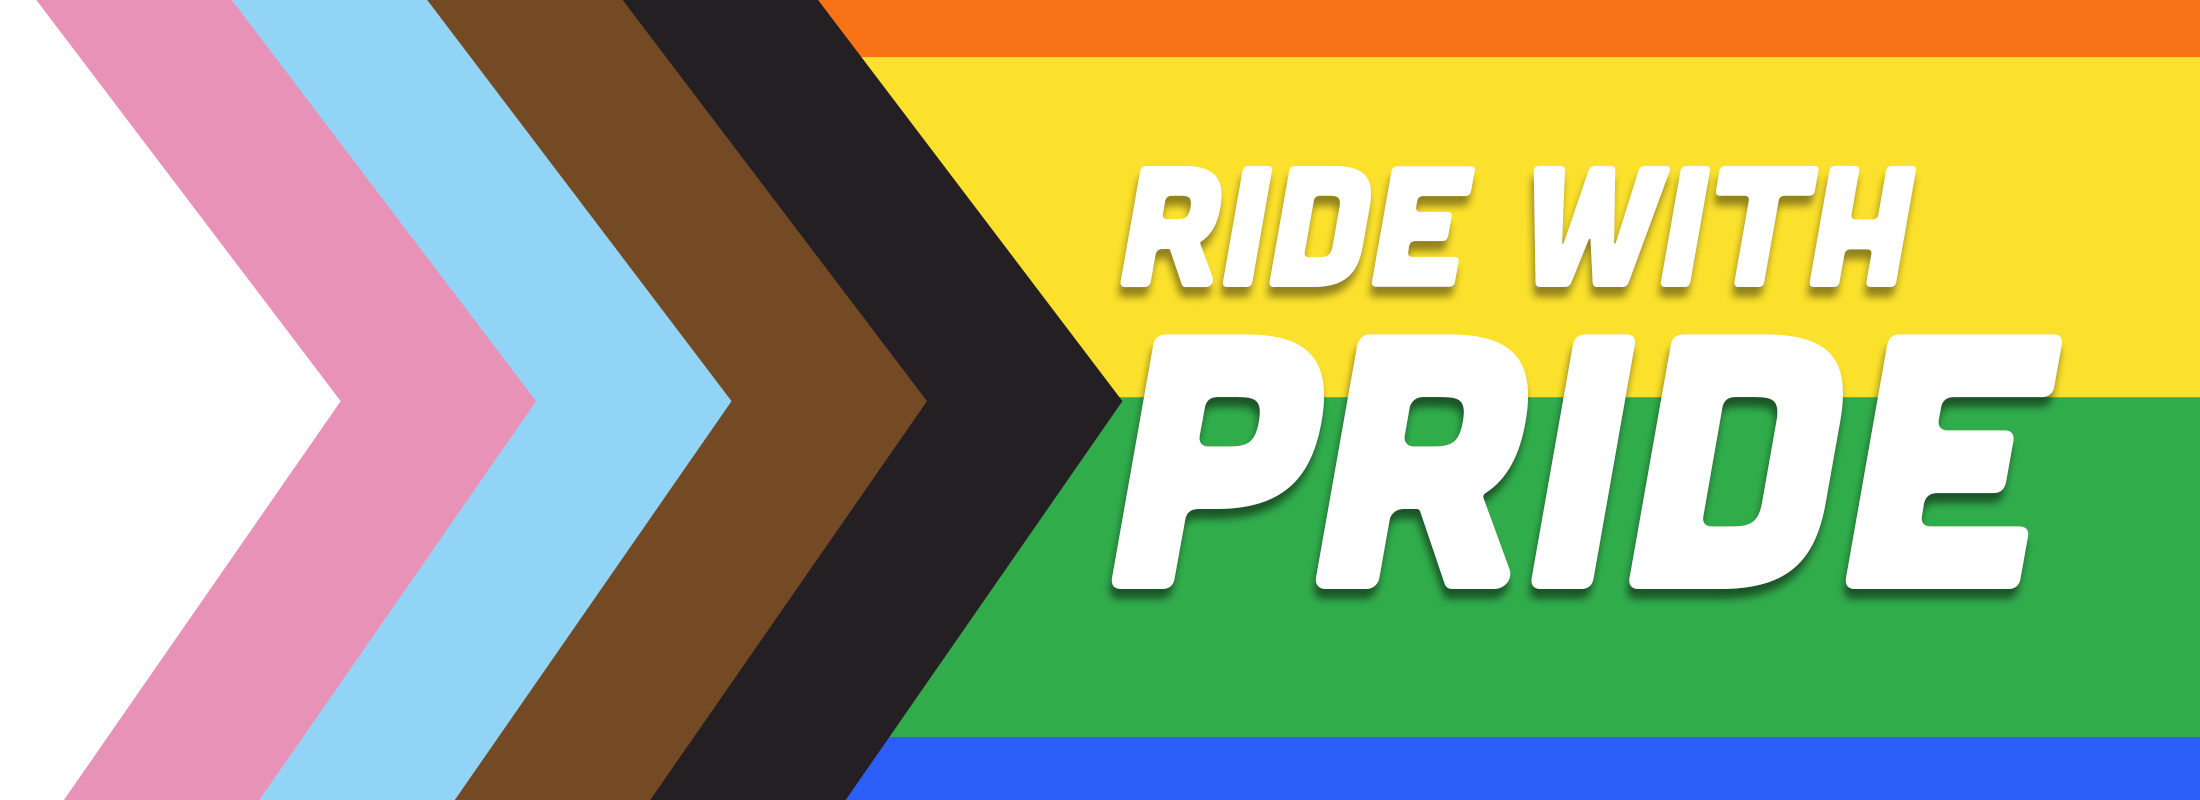 amtrak-ride-with-pride-flag